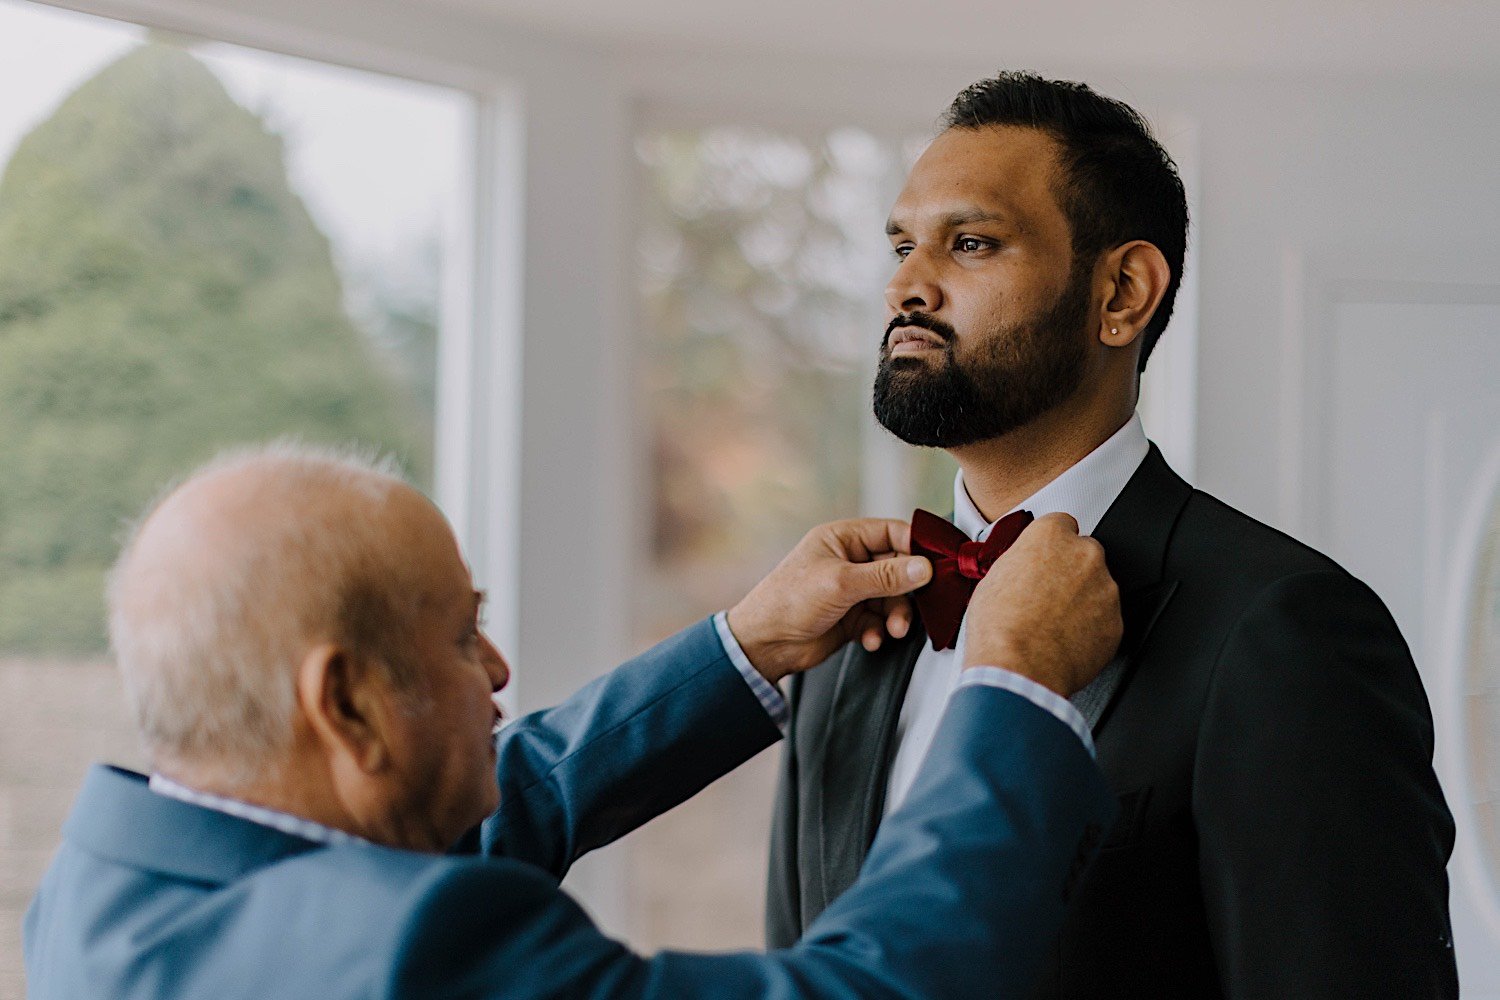 Father adjusts son's bowtie as they get ready for the son's wedding